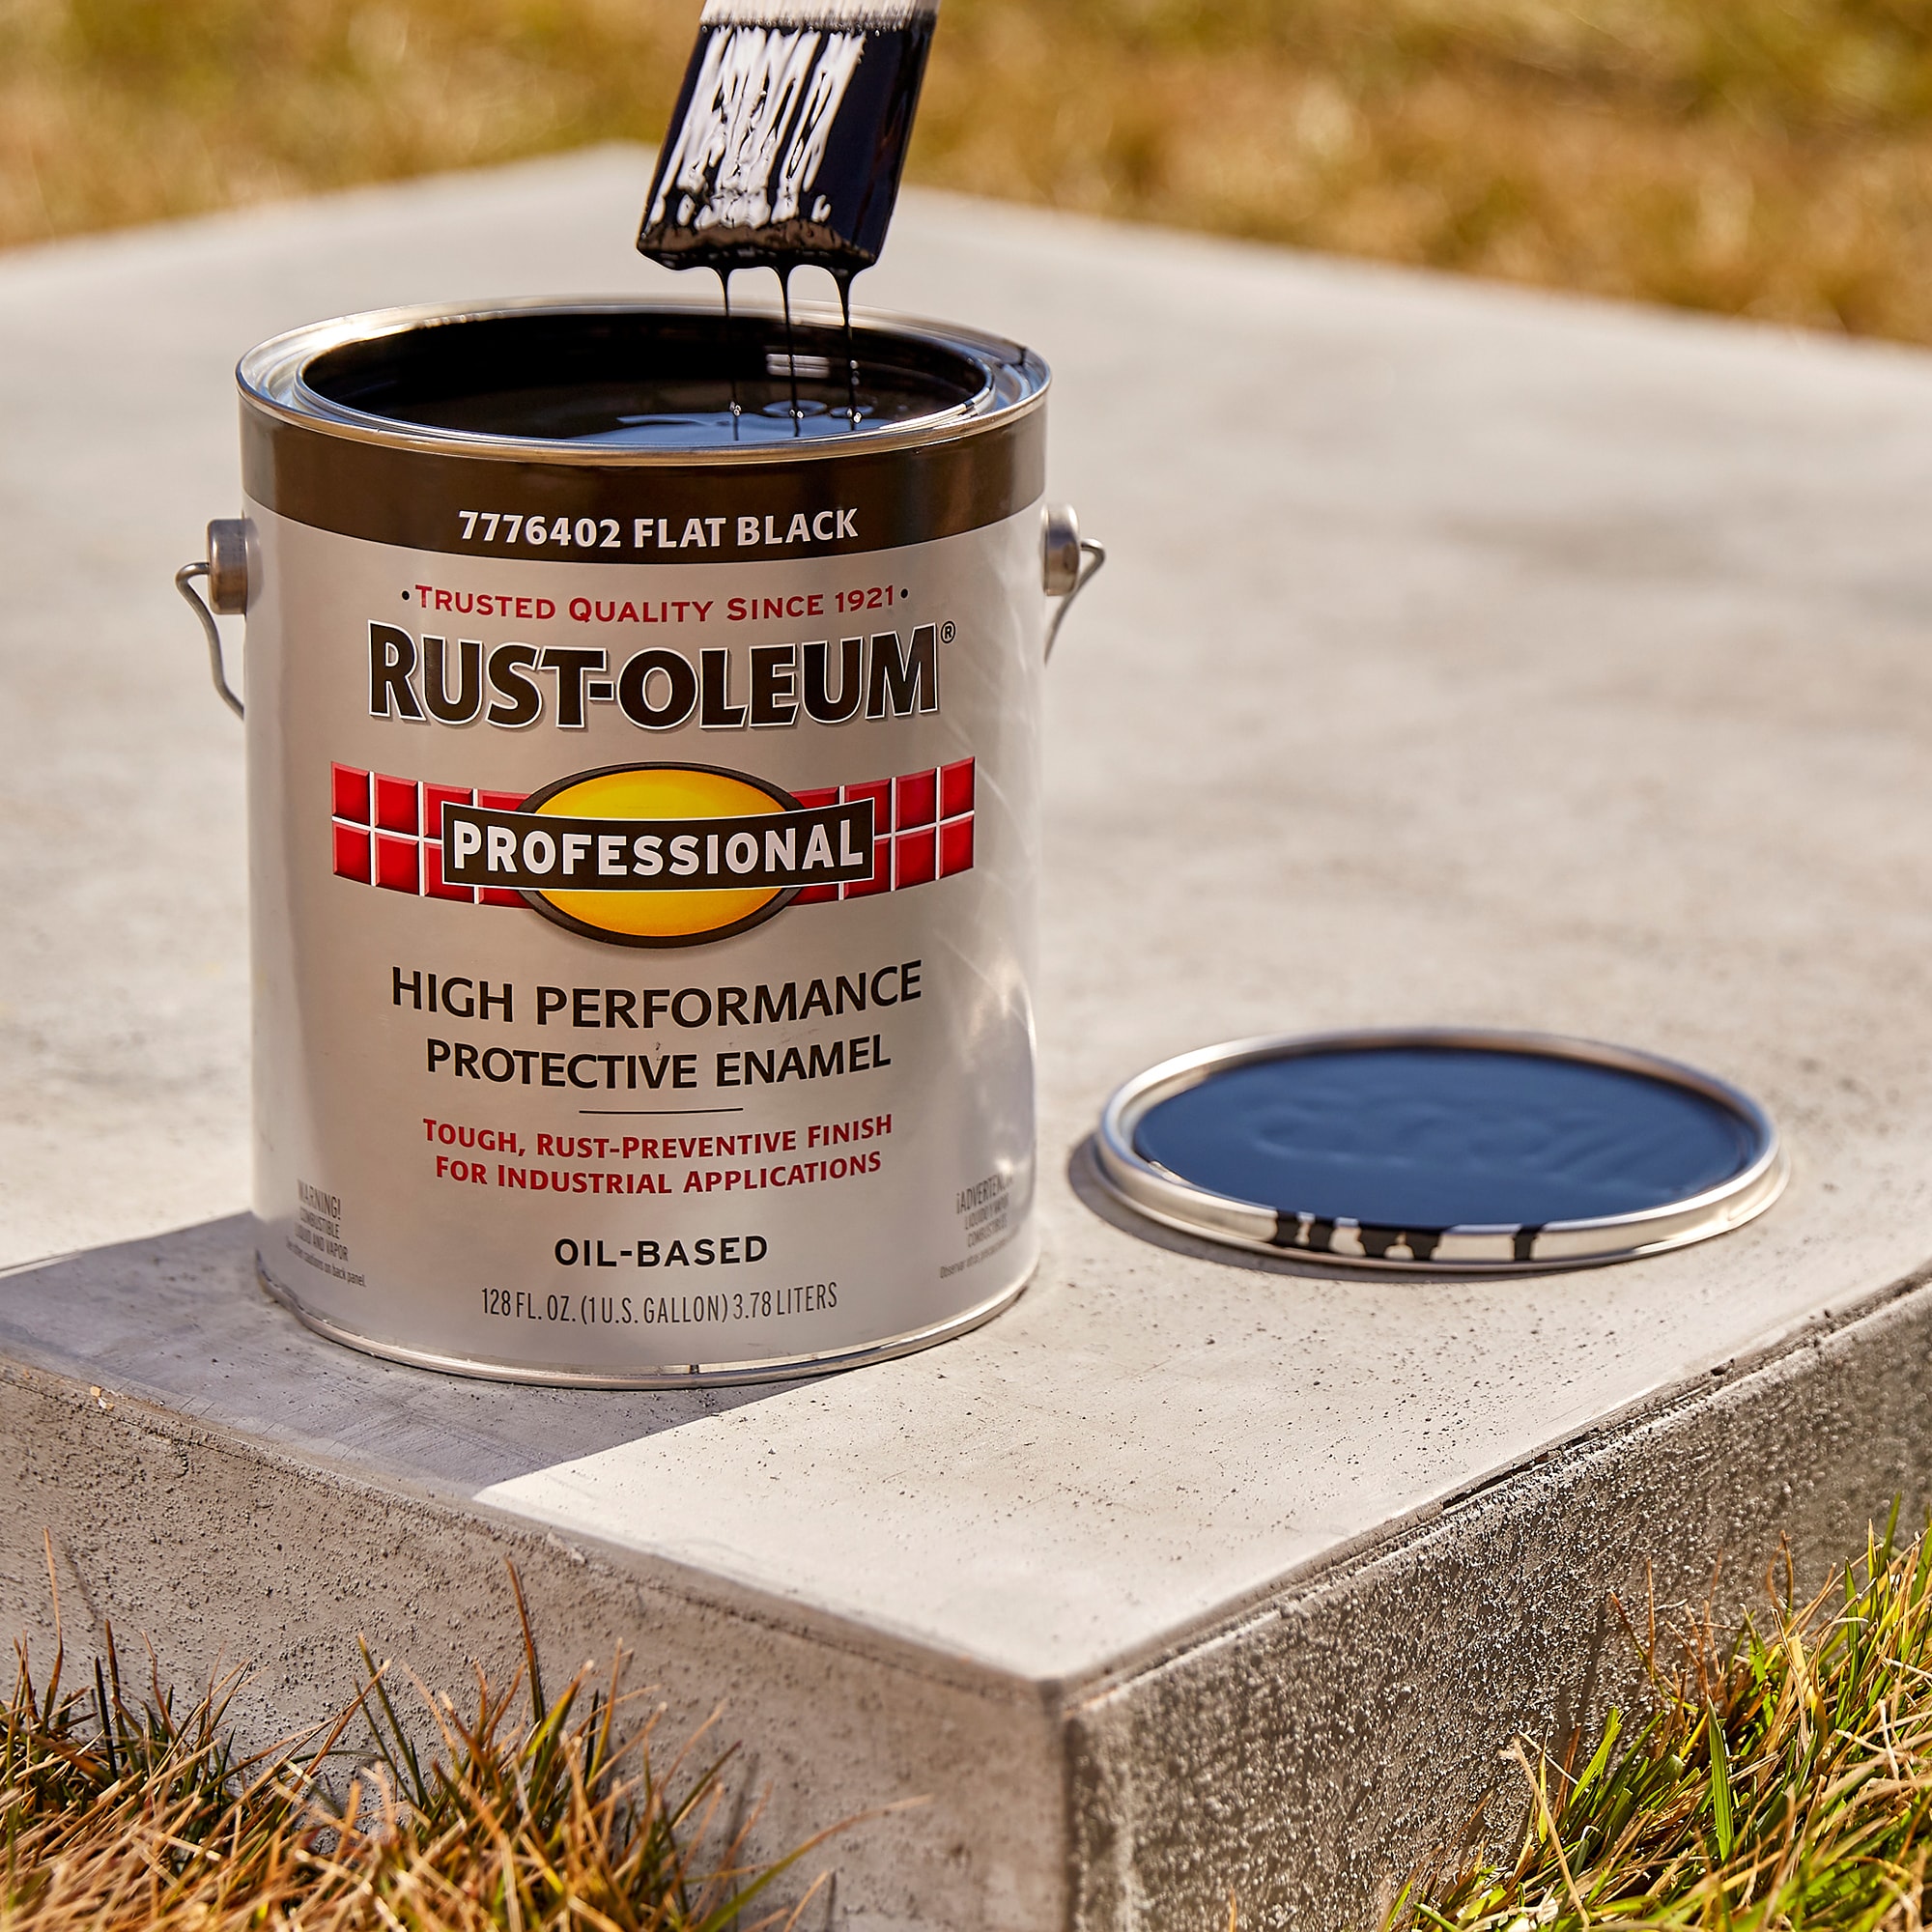 Shiny Things: Rust-Oleum Mirror Finish & Giveaway